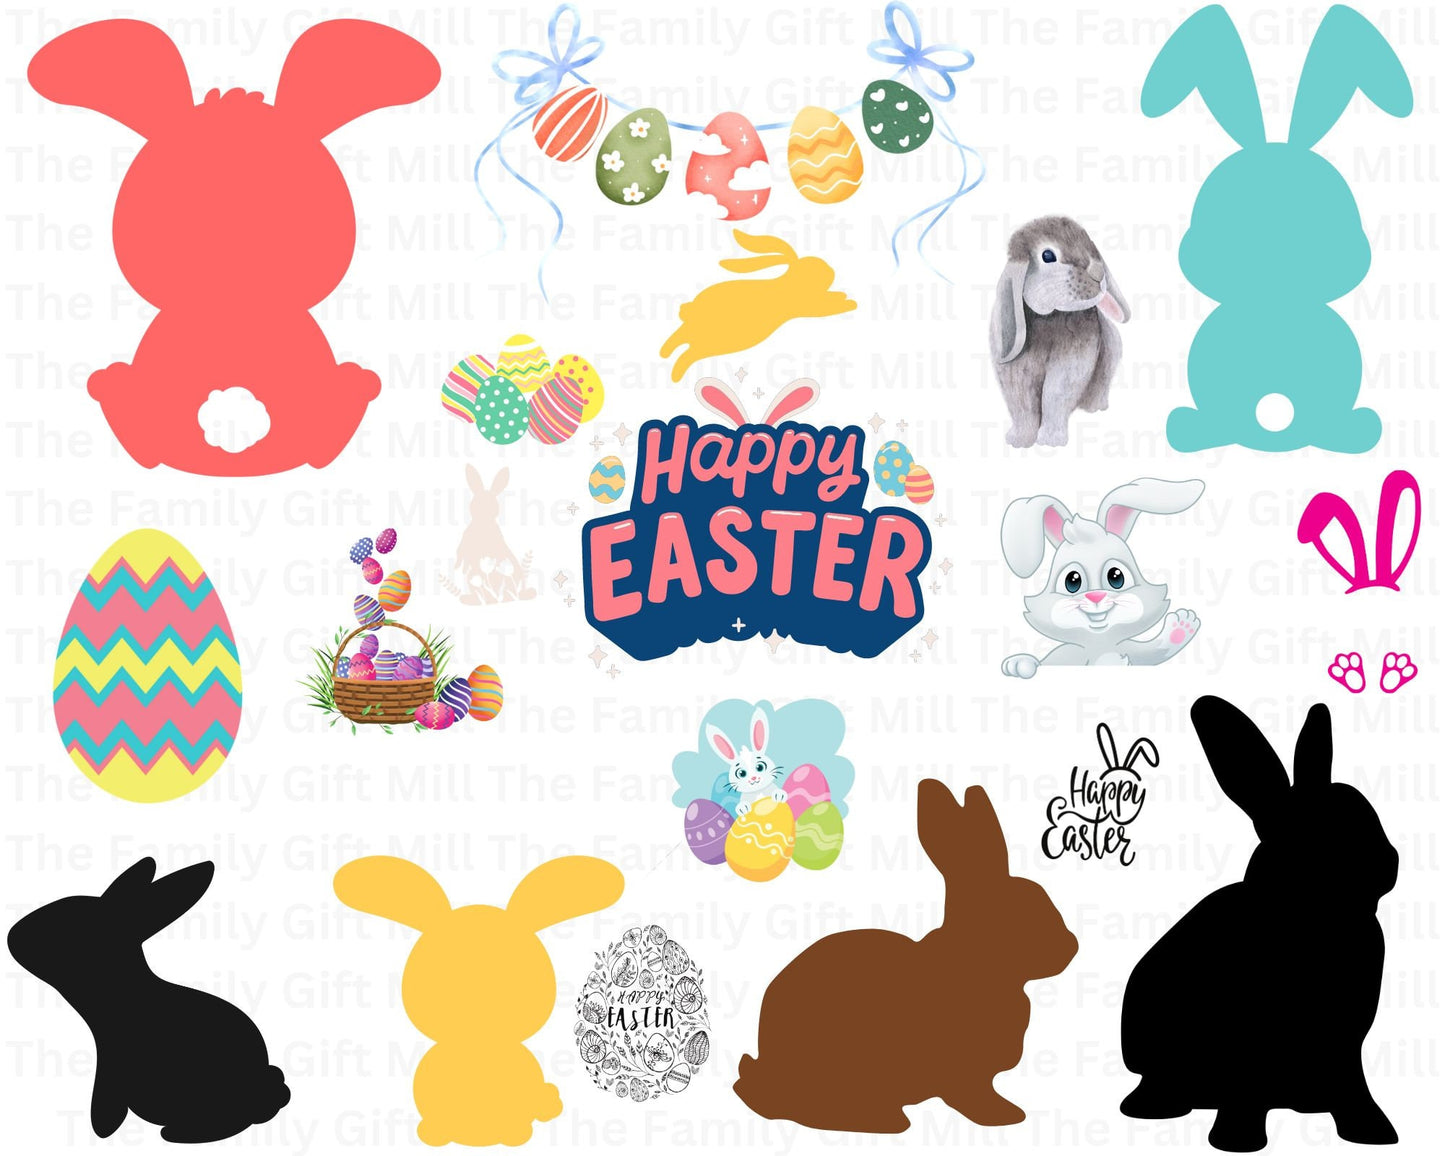 Easter Bunny Silhouette SVG, Cute Rabbit Shape Cut File for Cricut, Easter Clipart, Bunny for DIY Projects, Instant Download in Svg/Png/Jpg